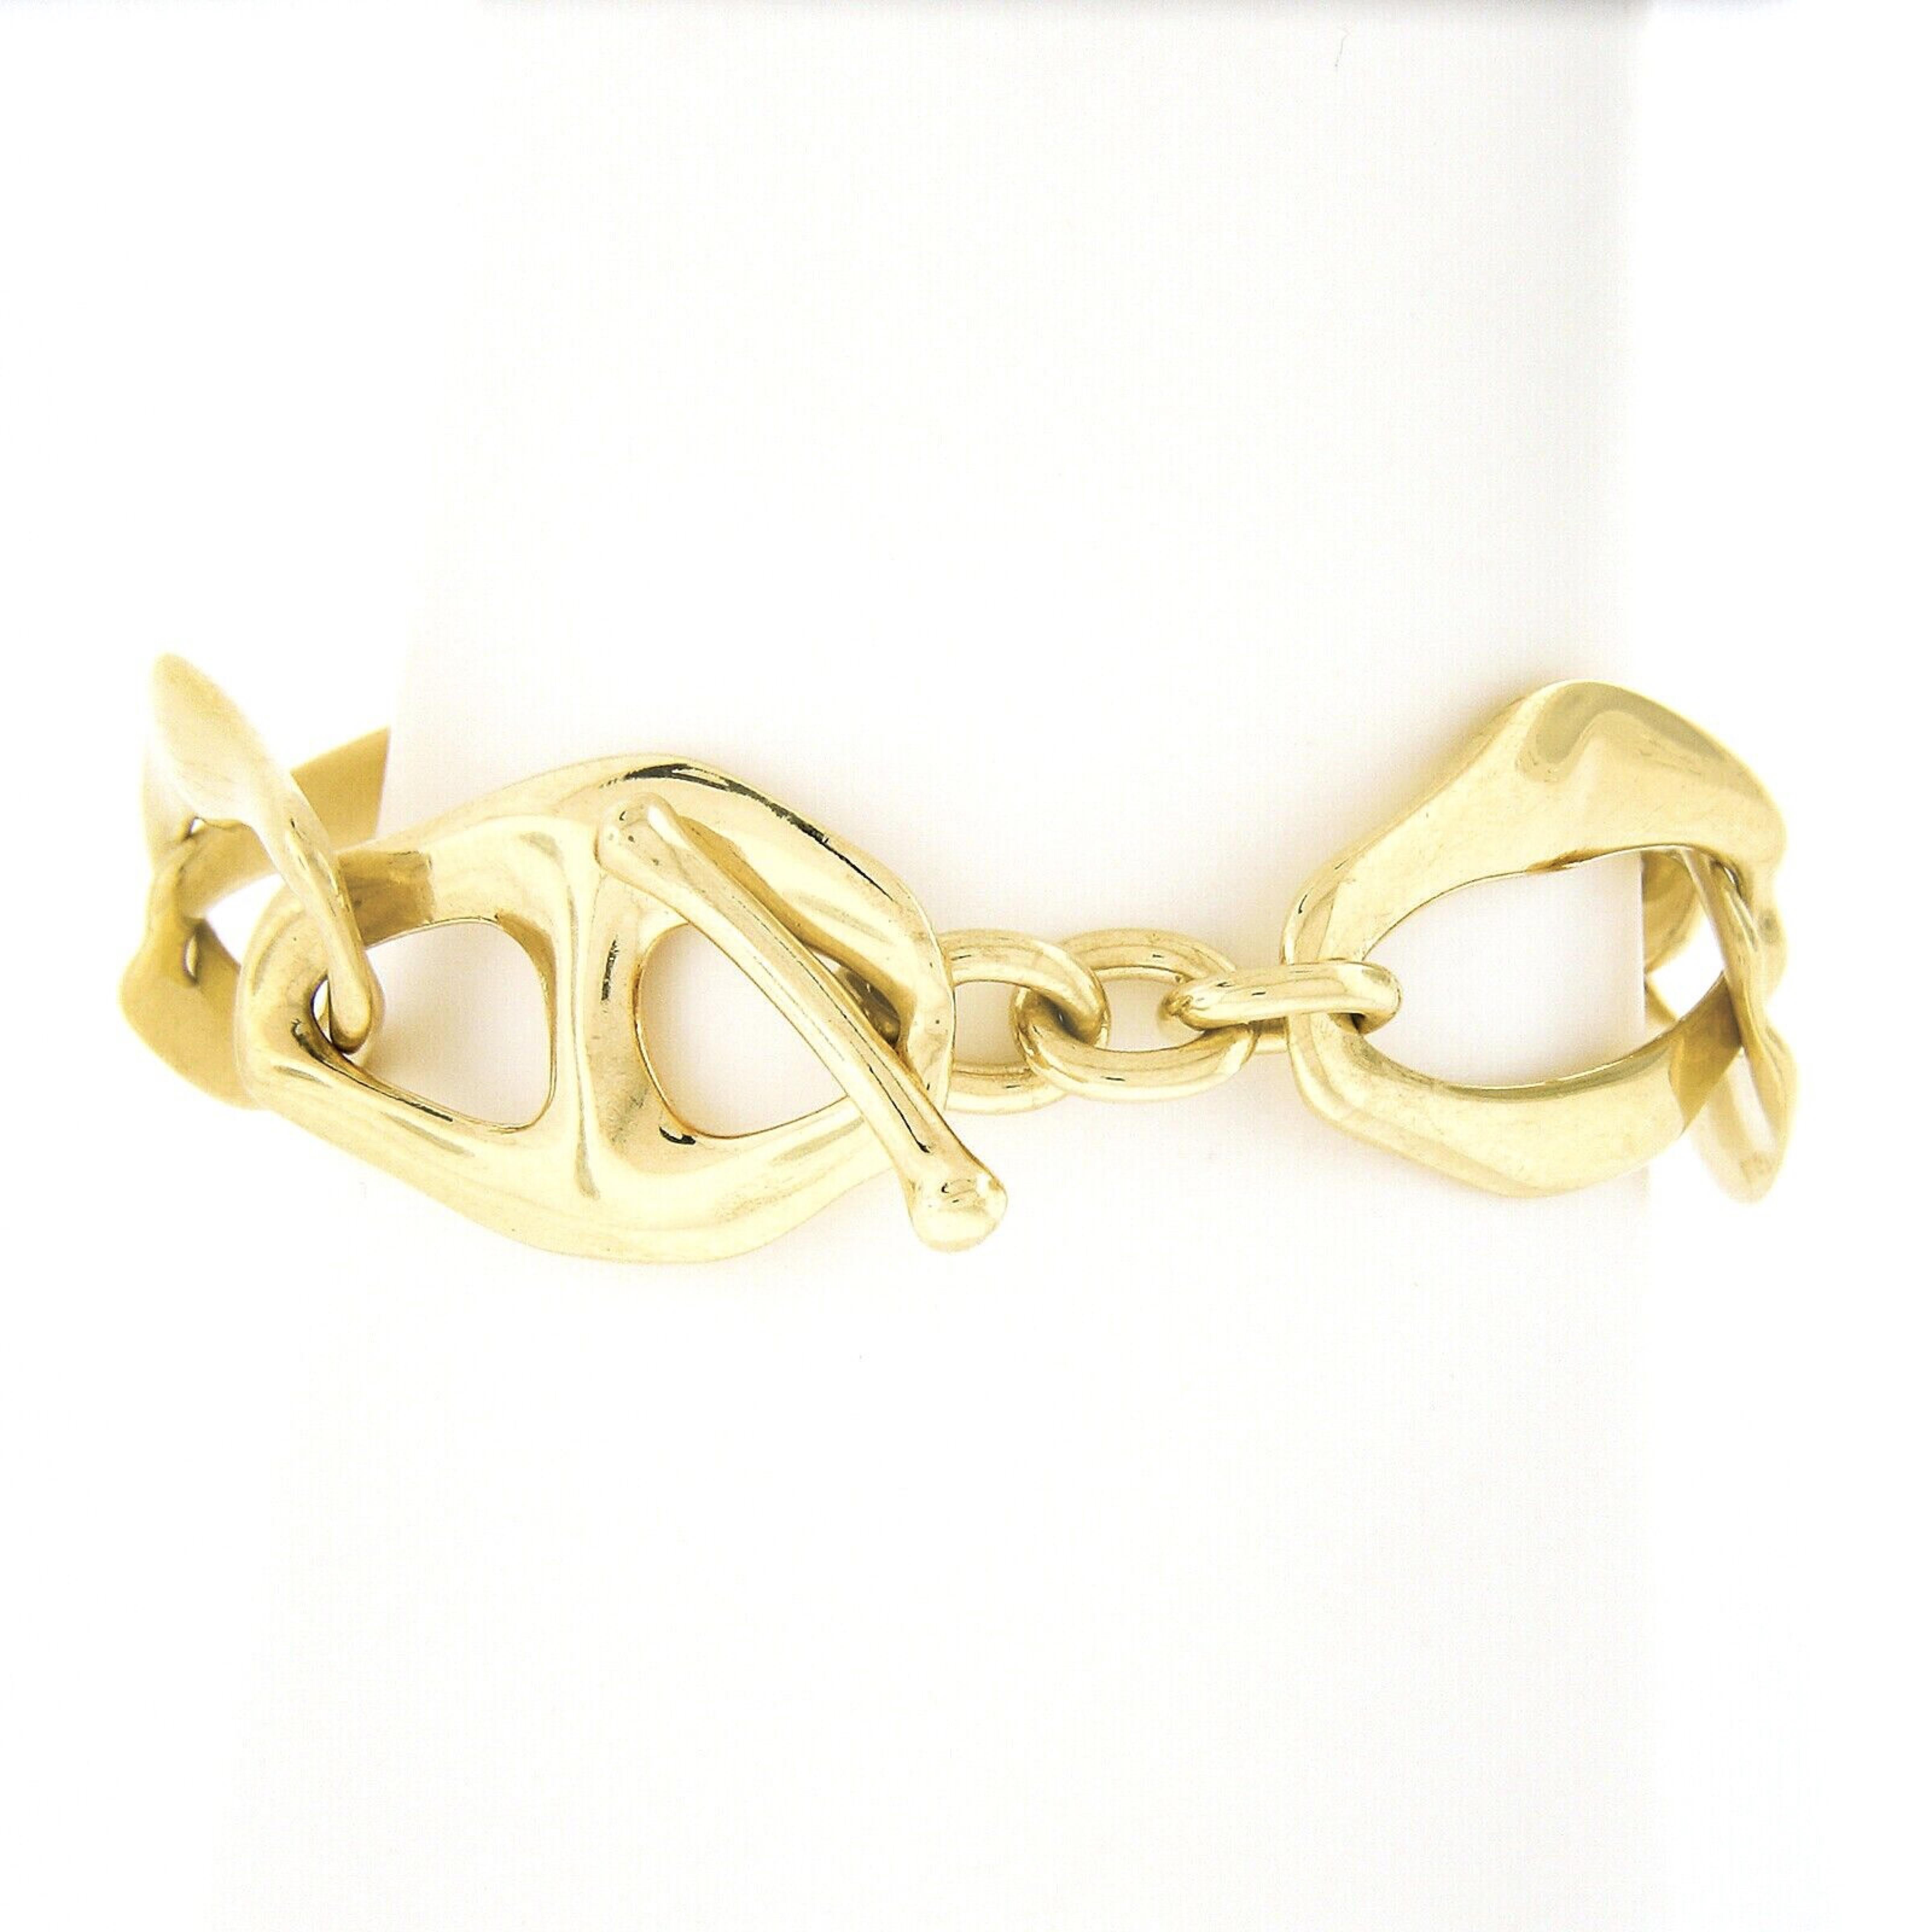 You are looking at an absolutely gorgeous Tiffany & Co. Aegean bracelet crafted in solid 18k yellow gold designed by Elsa Peretti. This beautiful bracelet features large wavy open links that have wonderful high polished finish throughout giving this